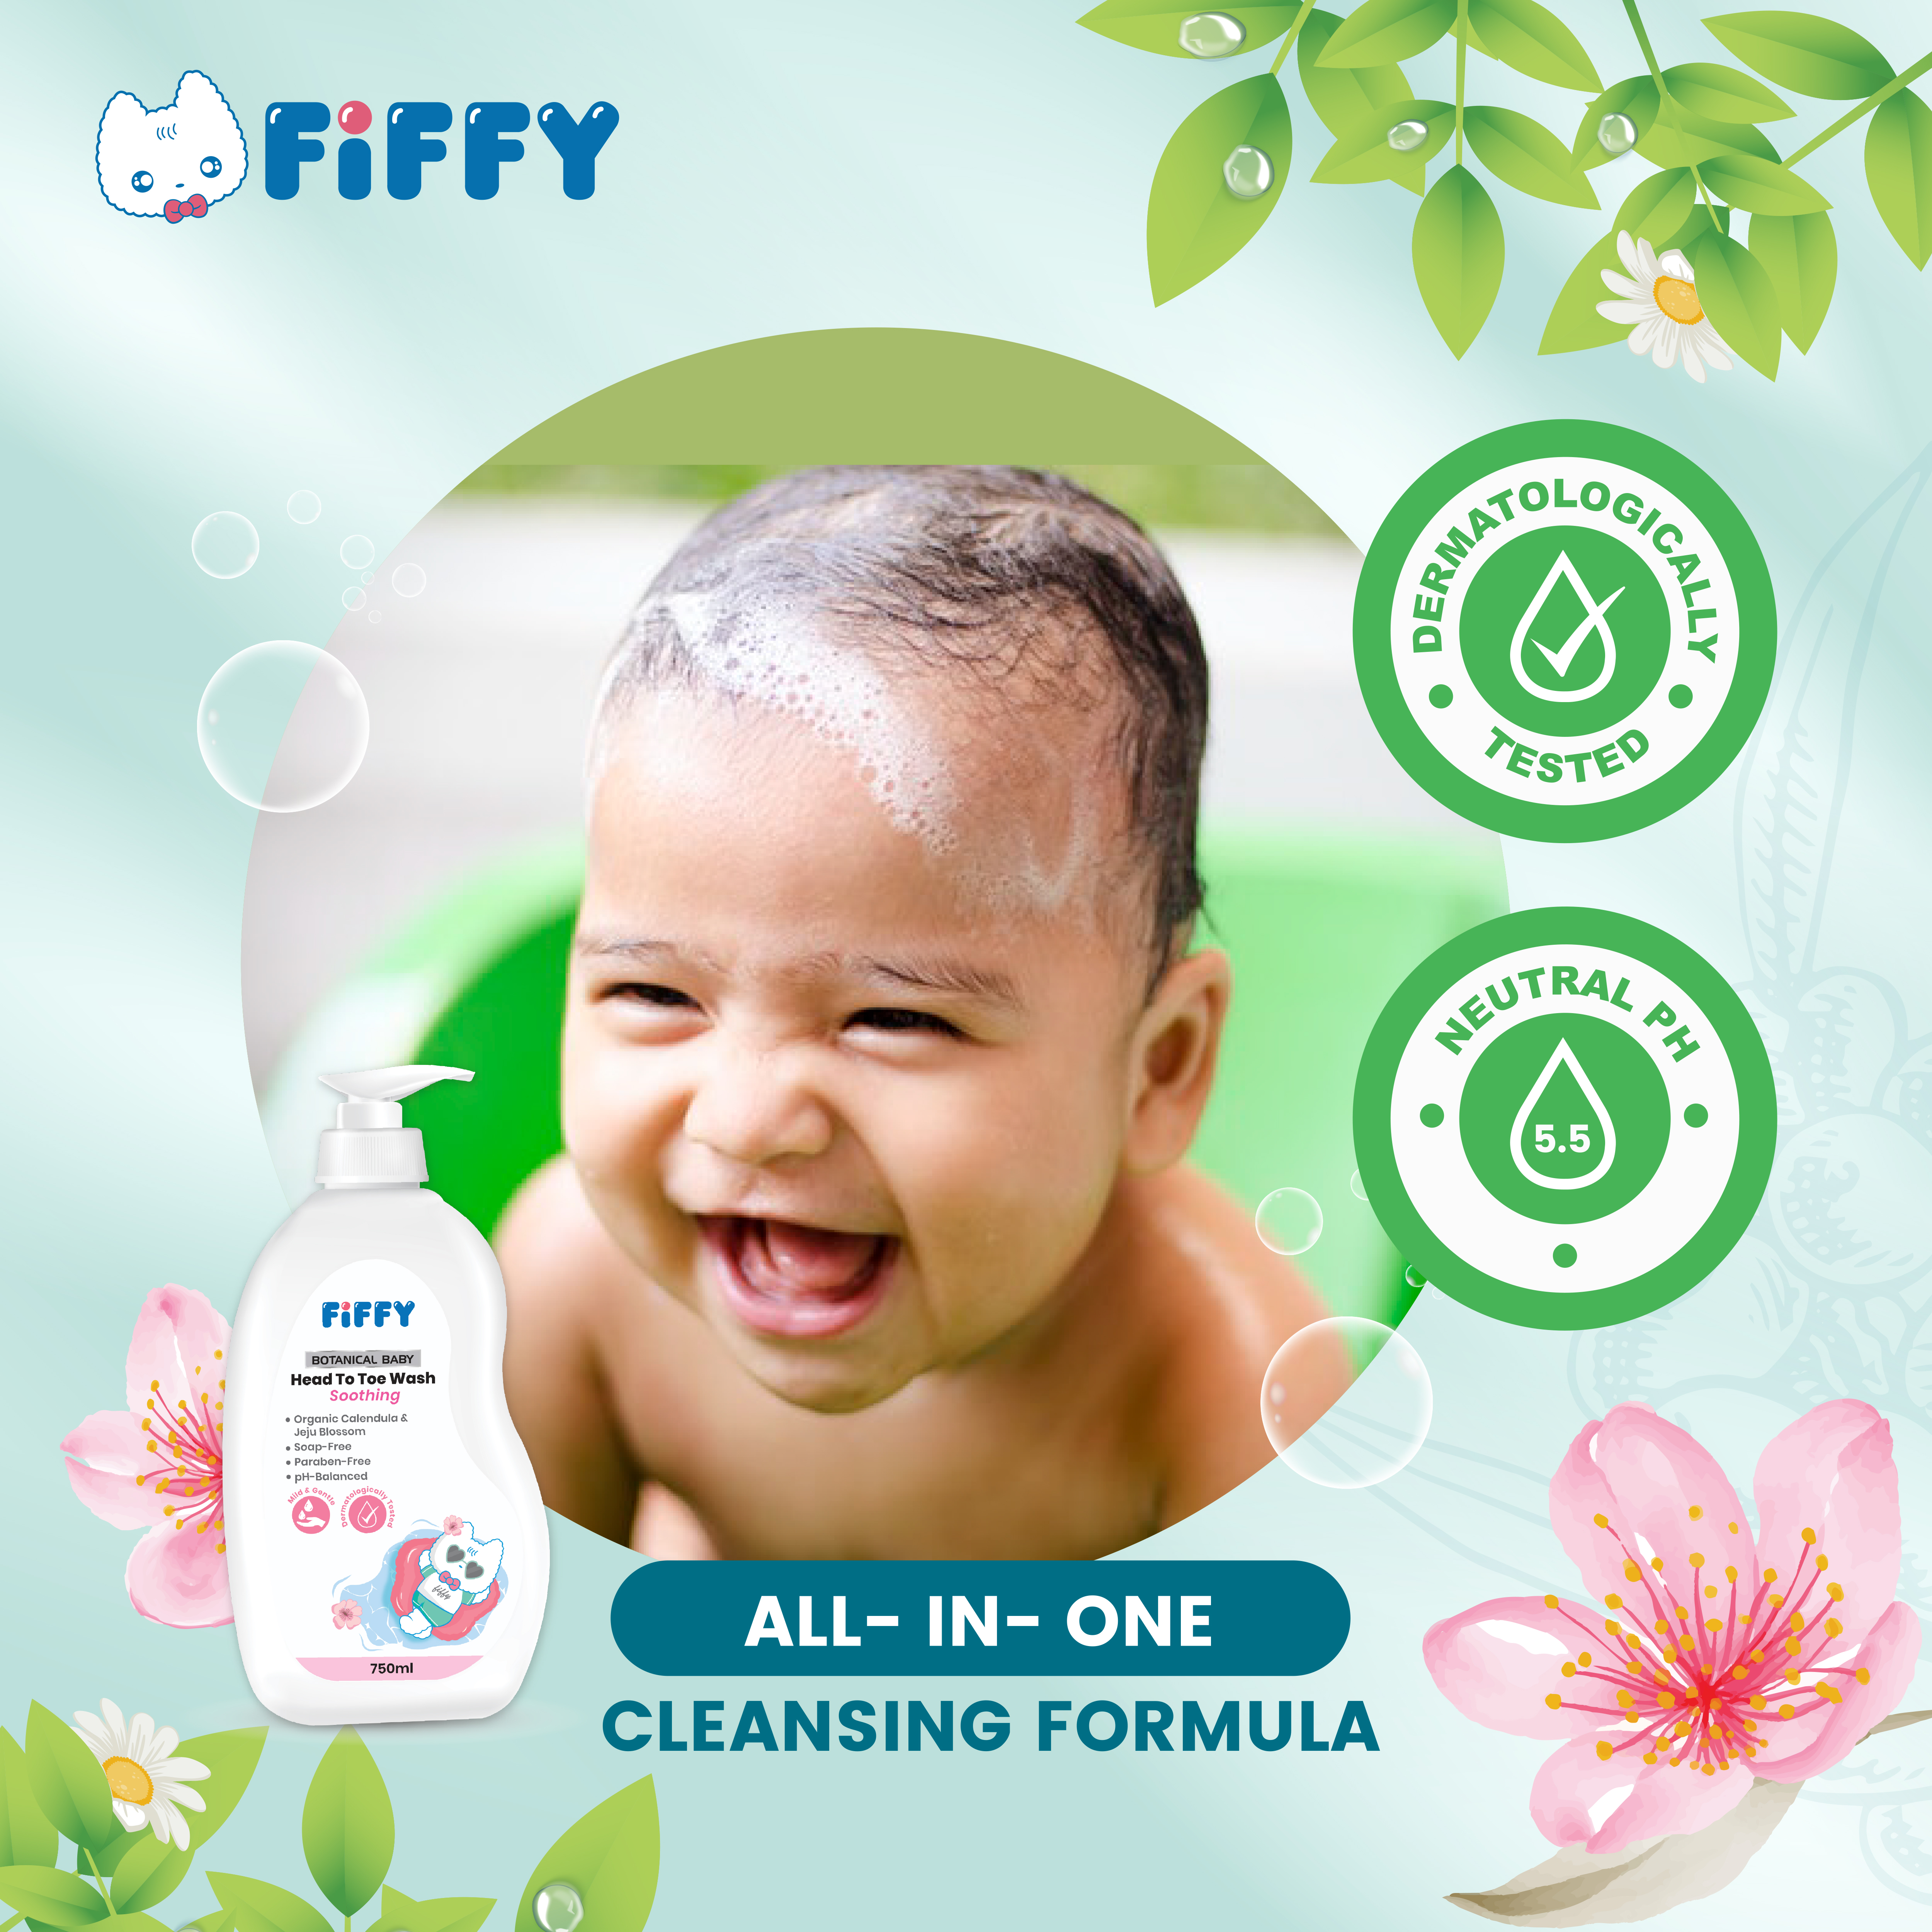 FIFFY BOTANICAL BABY HEAD TO TOE WASH (SOOTHING) 750ML